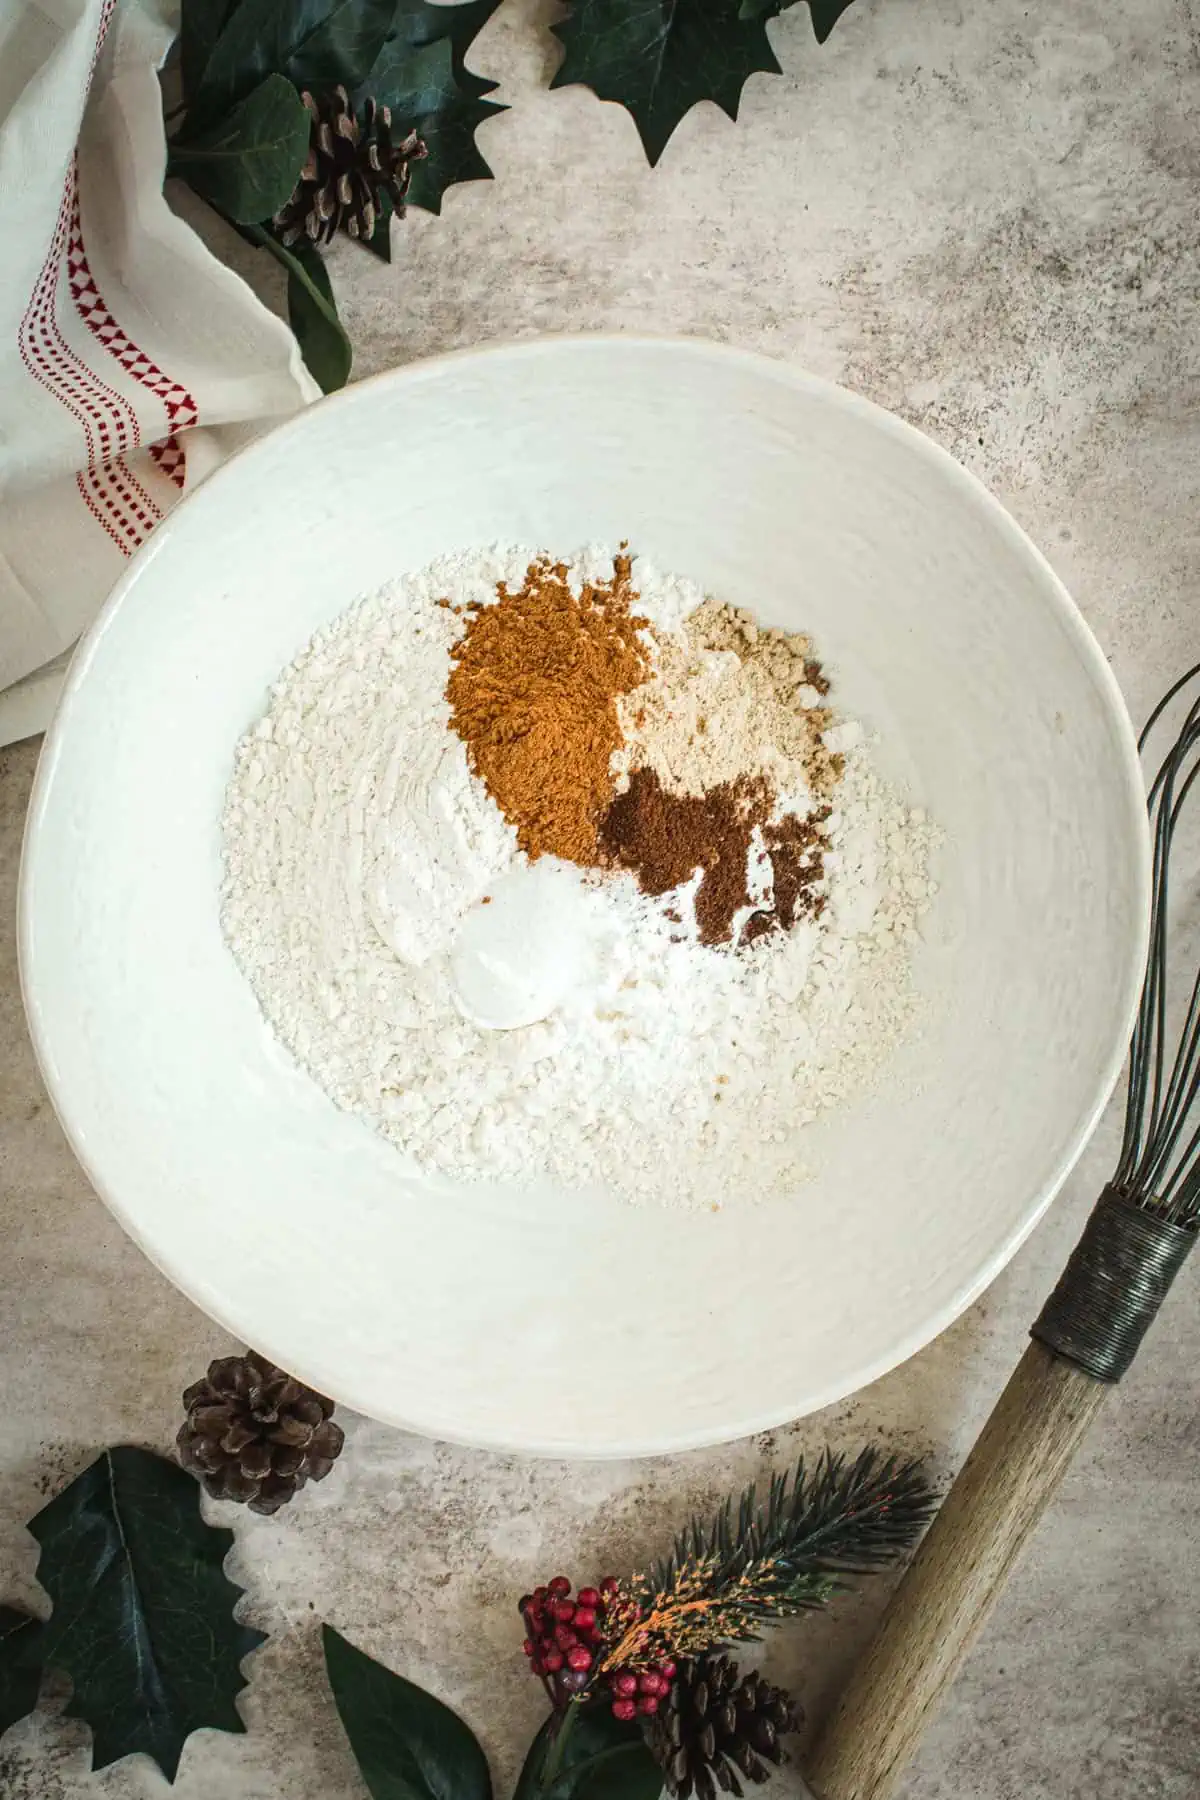 Dry ingredients in a mixing bowl for making gingerbread pancakes.